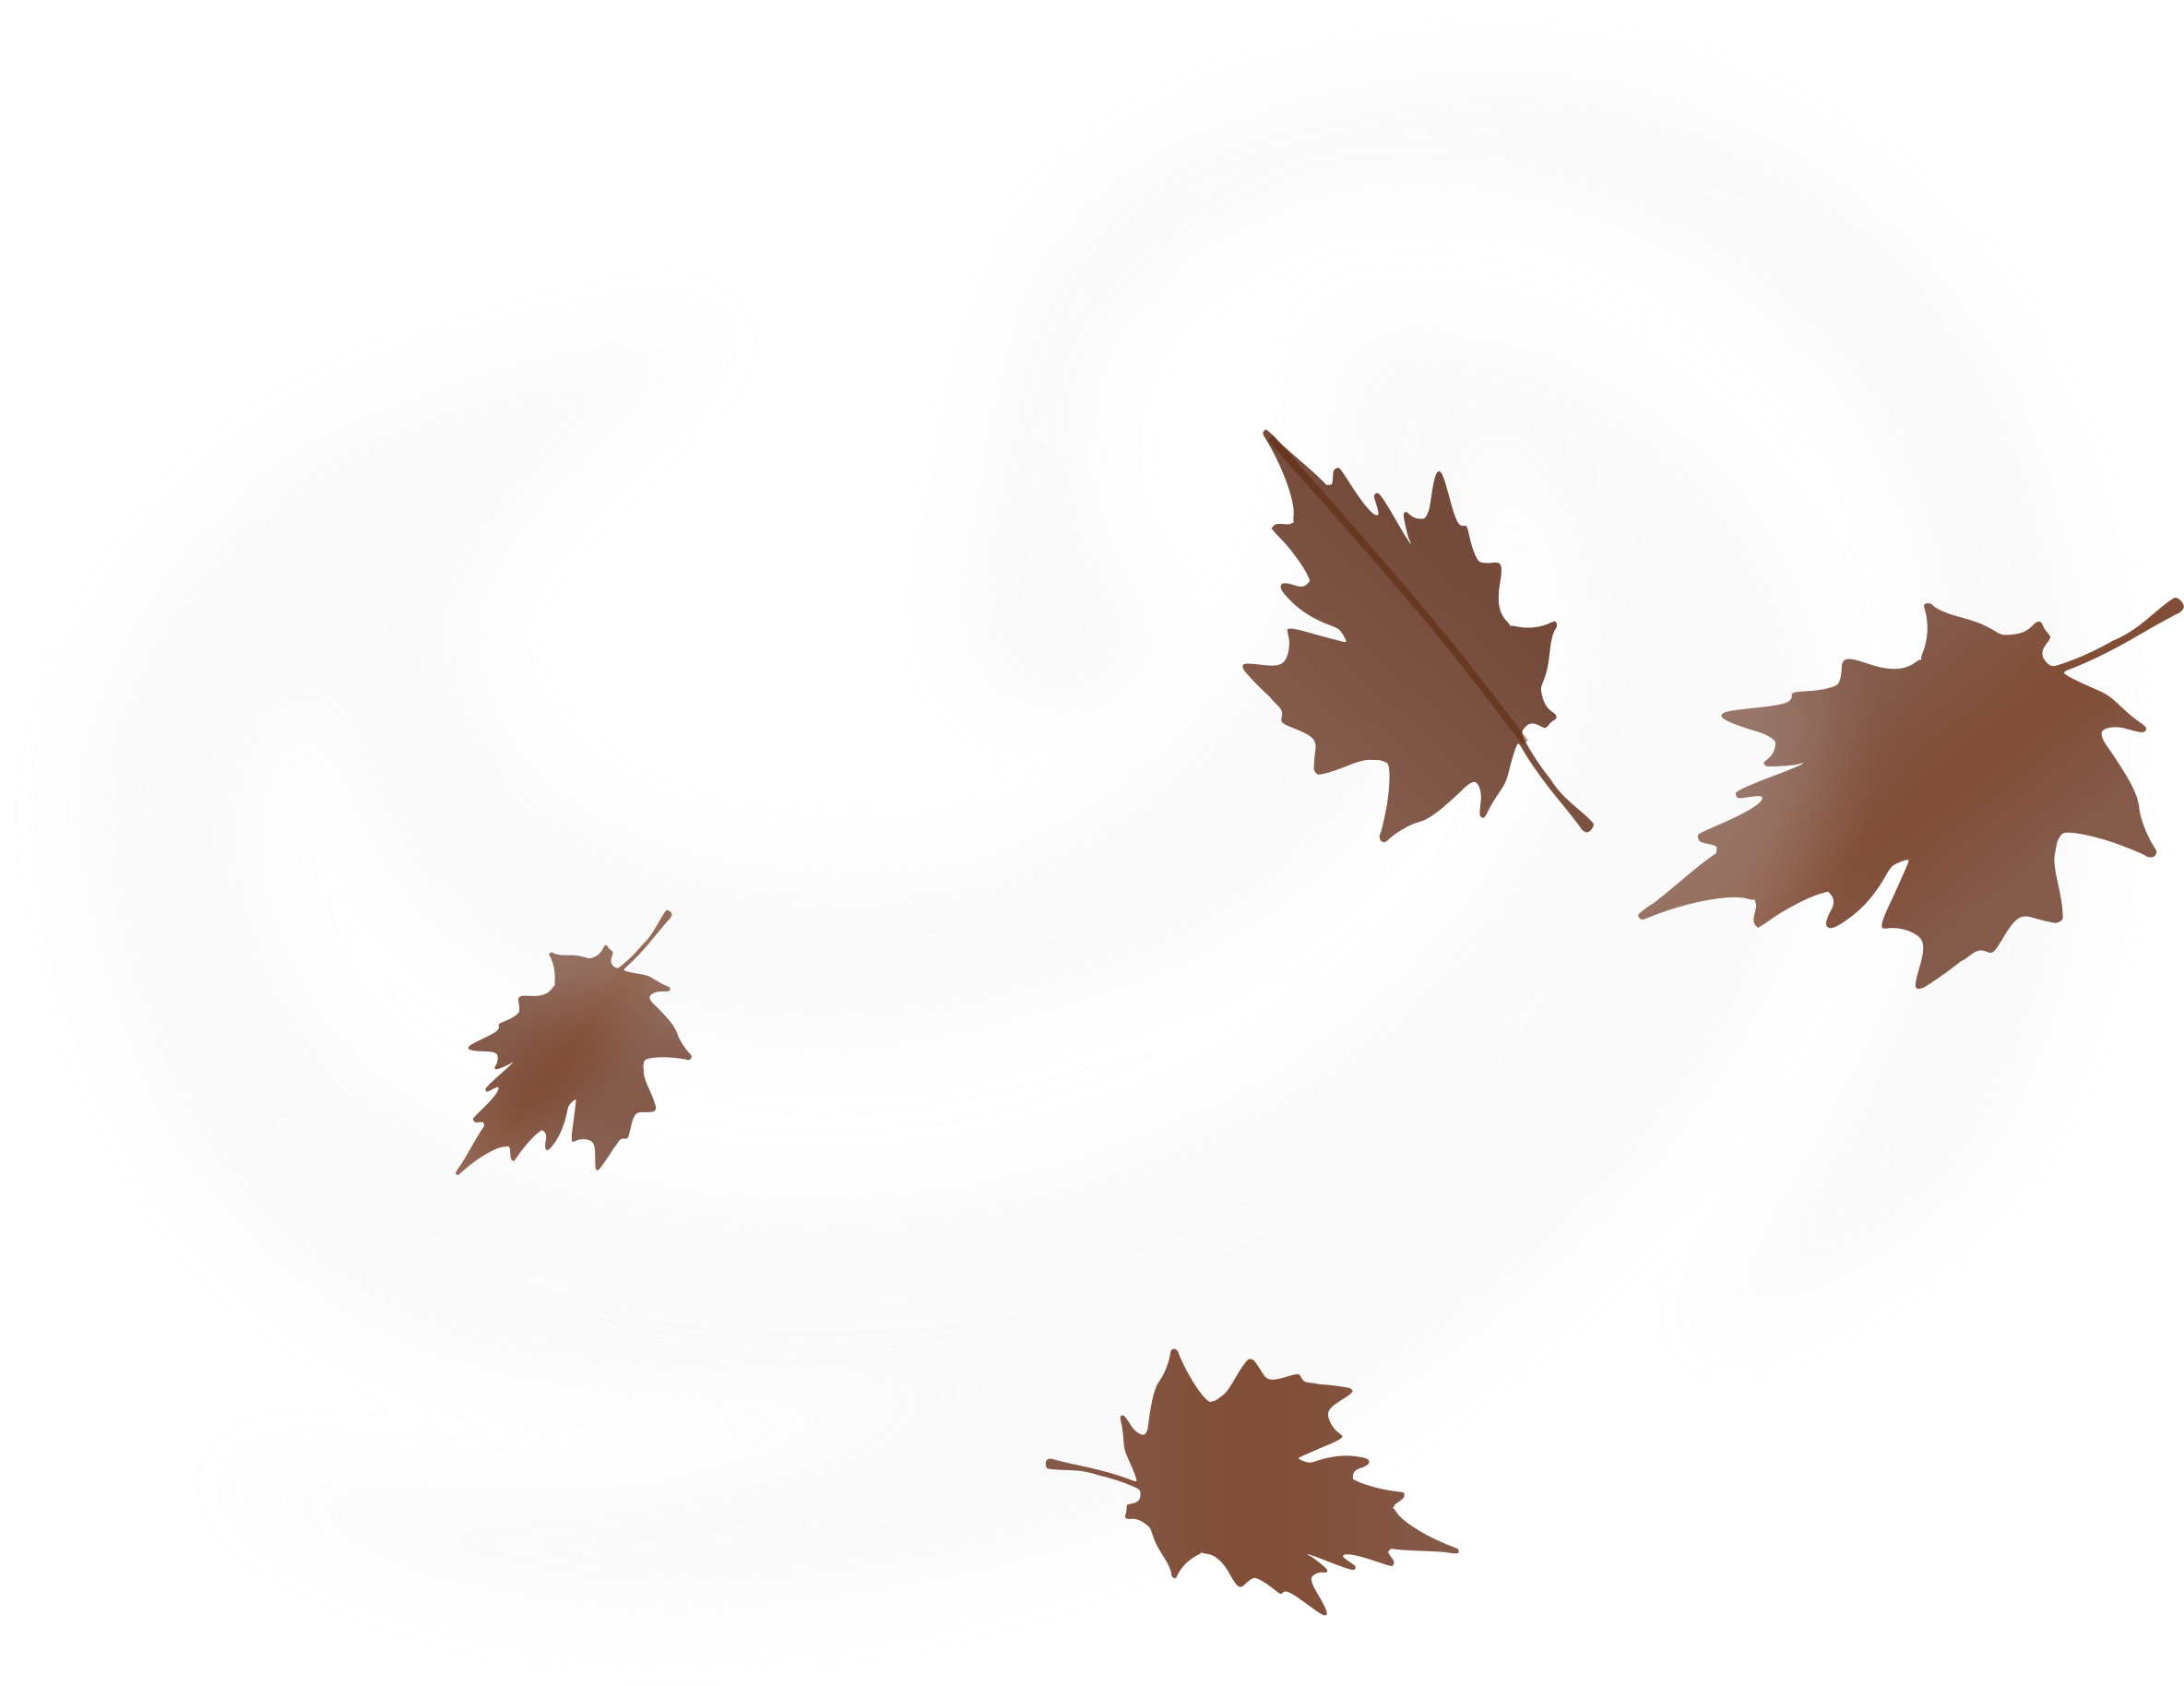 A Black Swirly Background With Brown Leaves